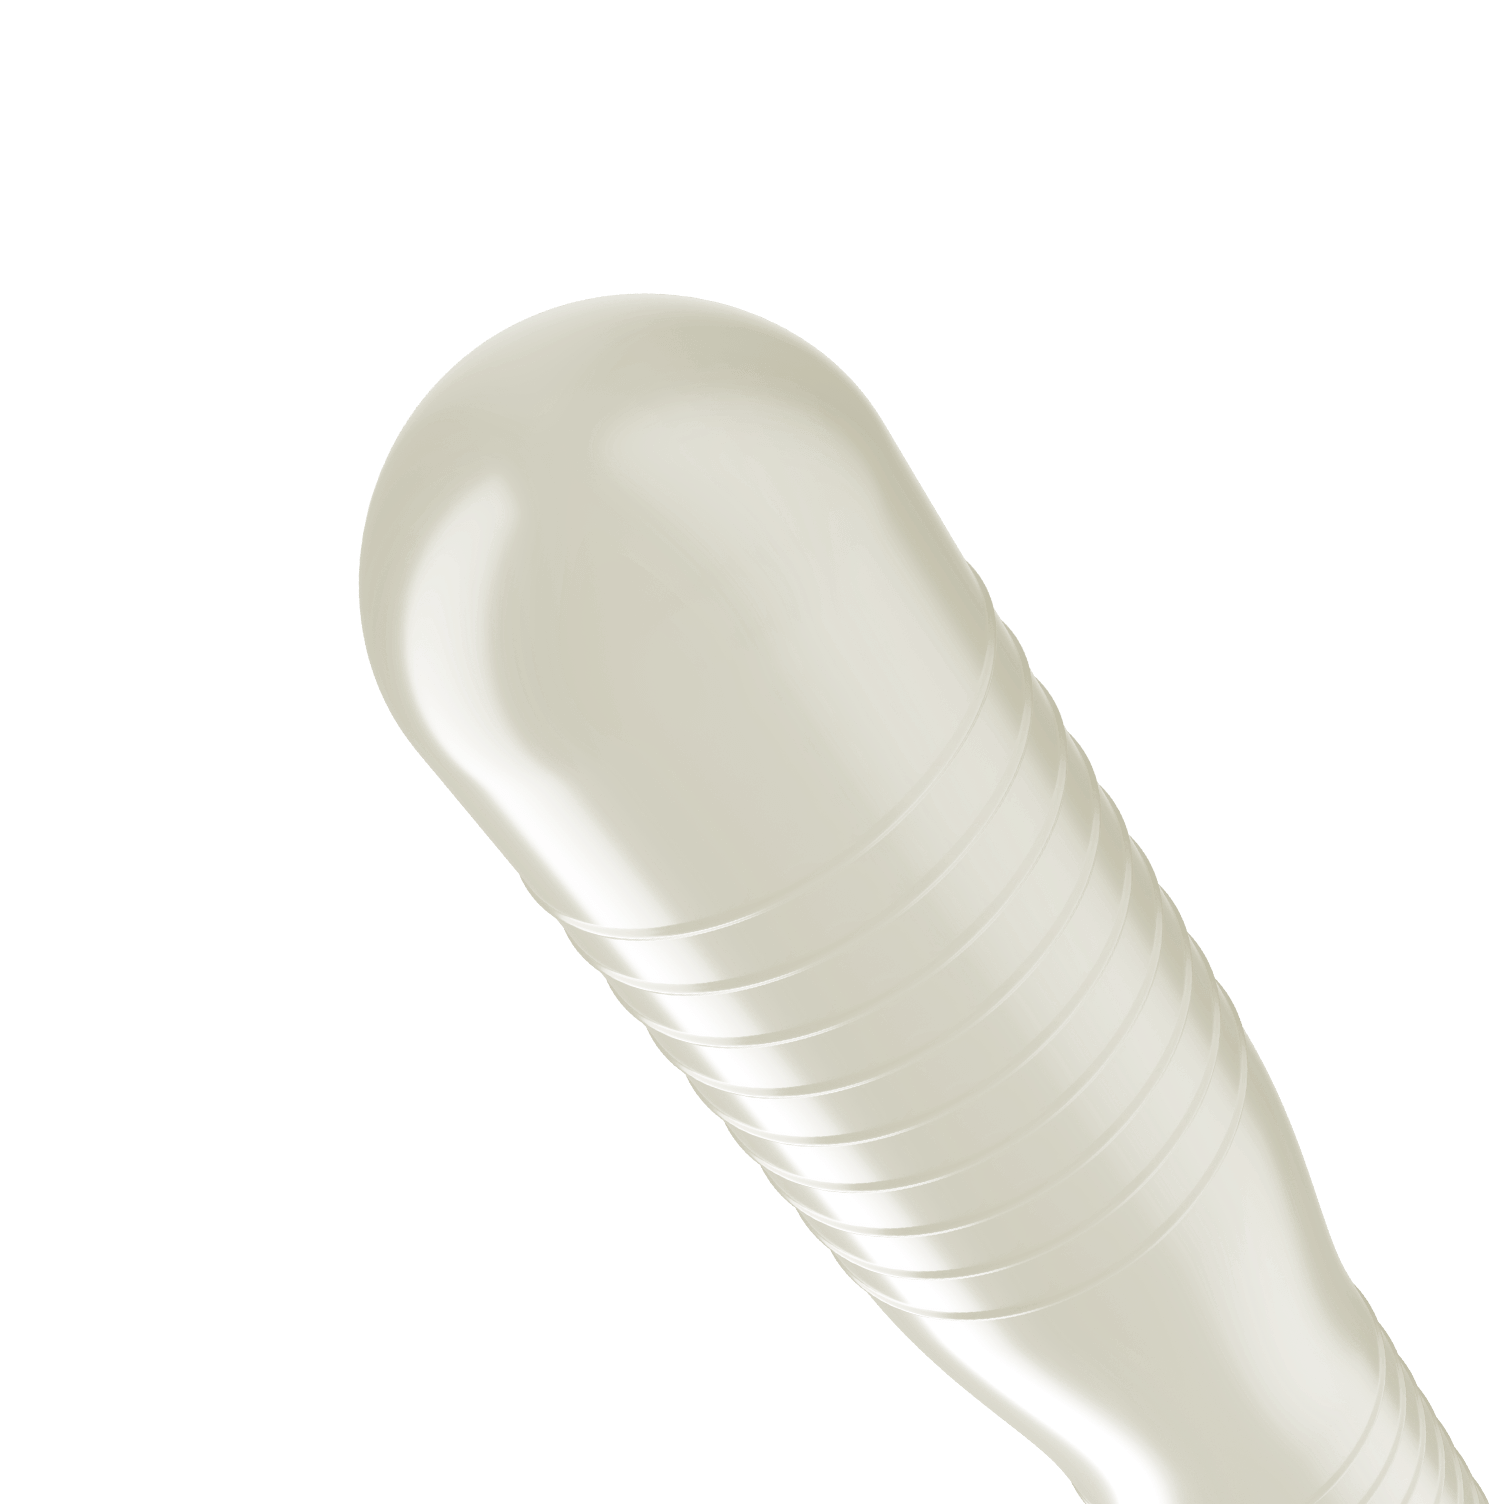 Trojan Double Ecstasy bulbous double deep ribbed shaped condom with tapered base.